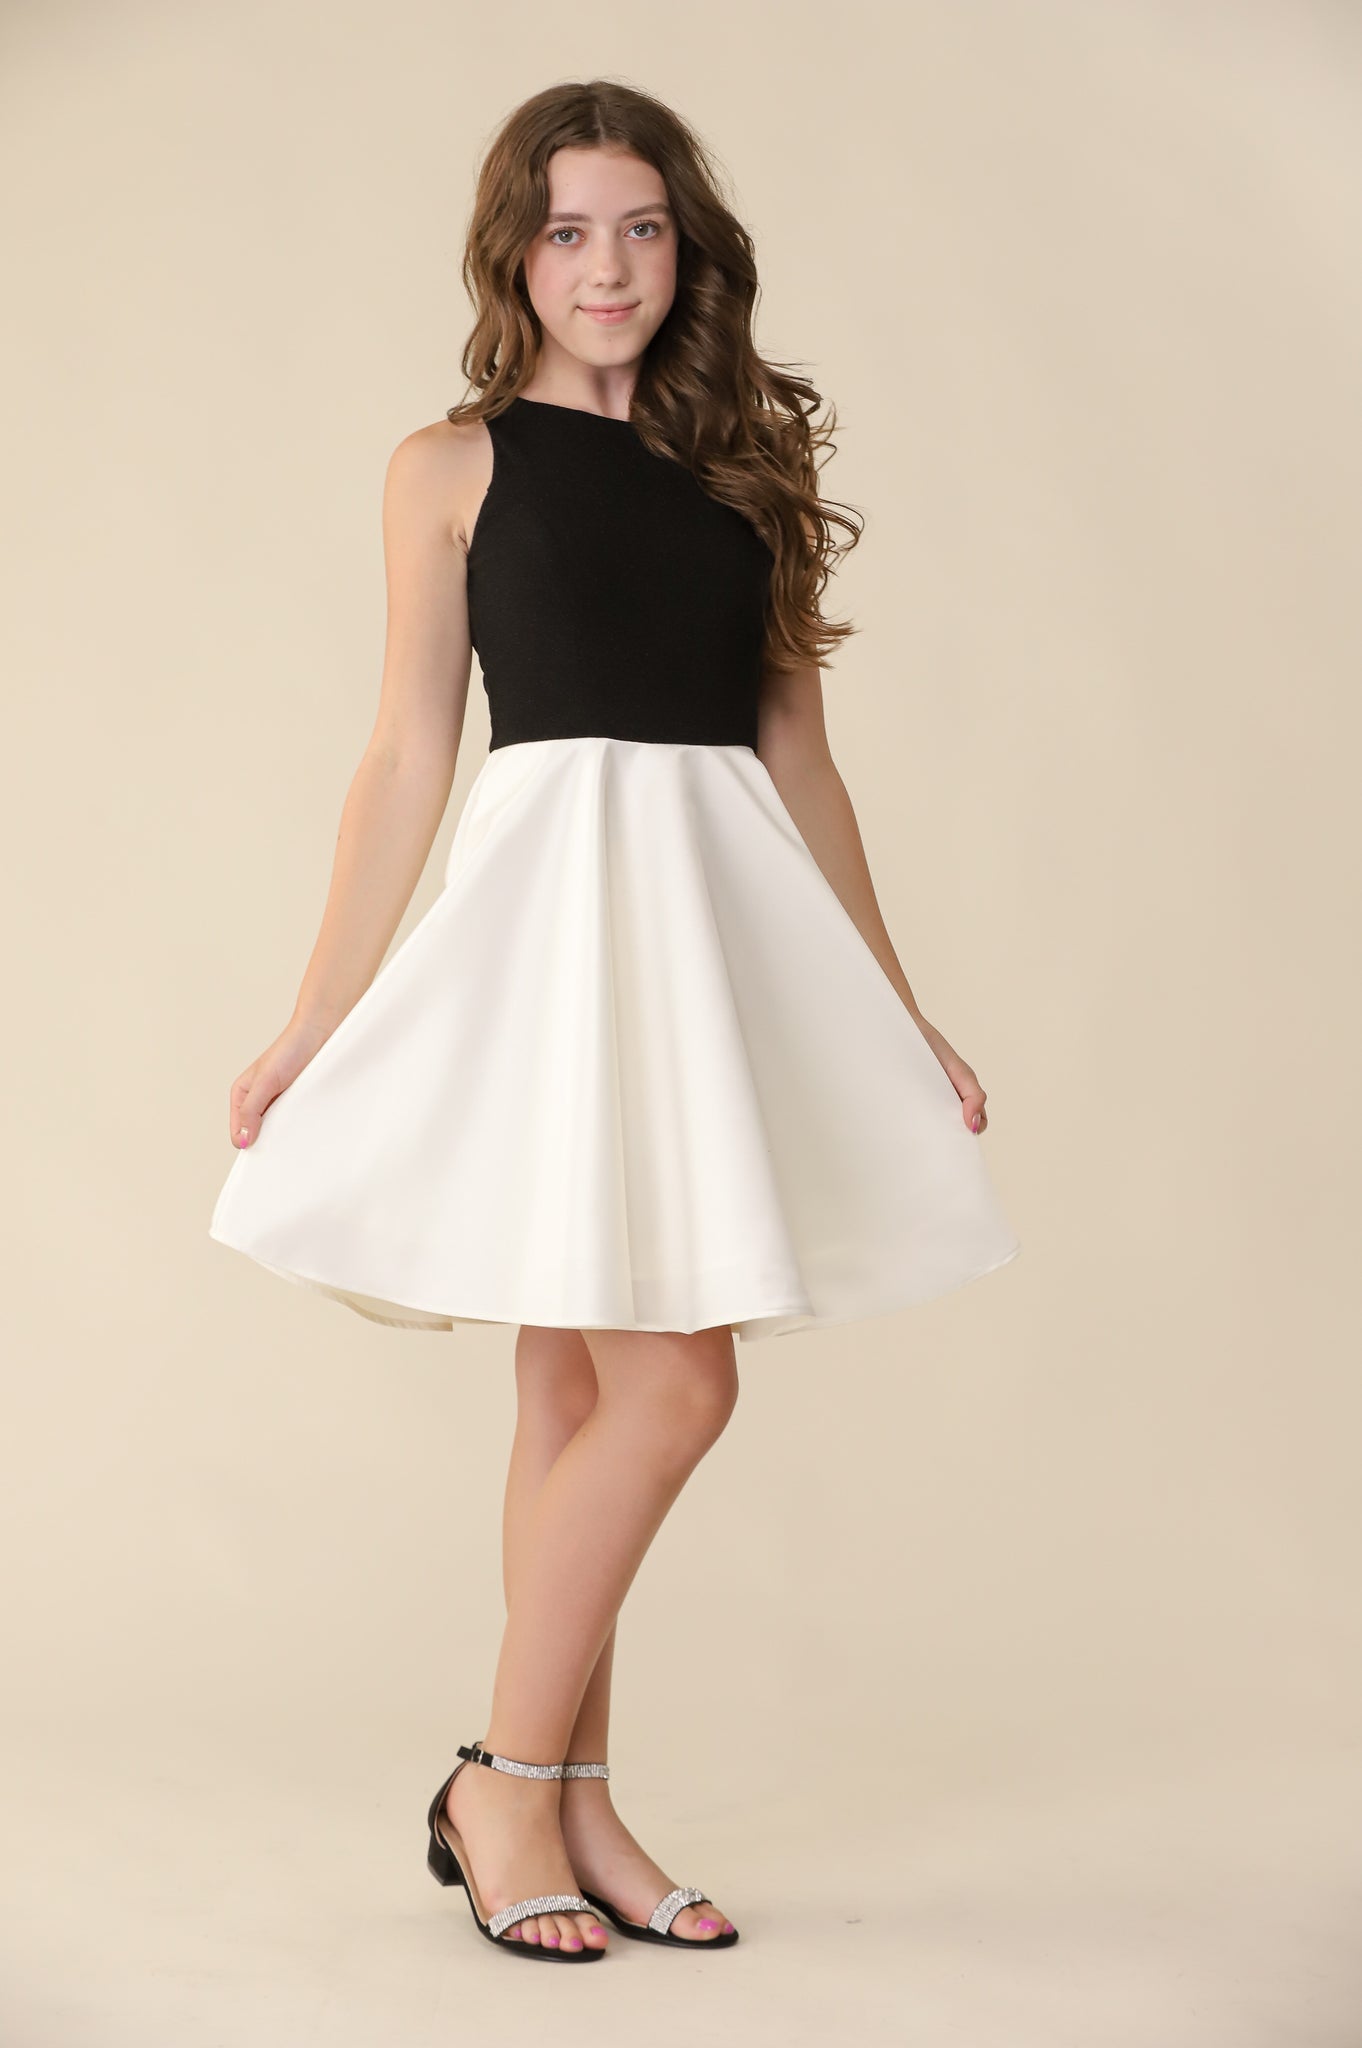 Brown haired girl in a glitter bodice dress with black circle skirt with black kitten heel.